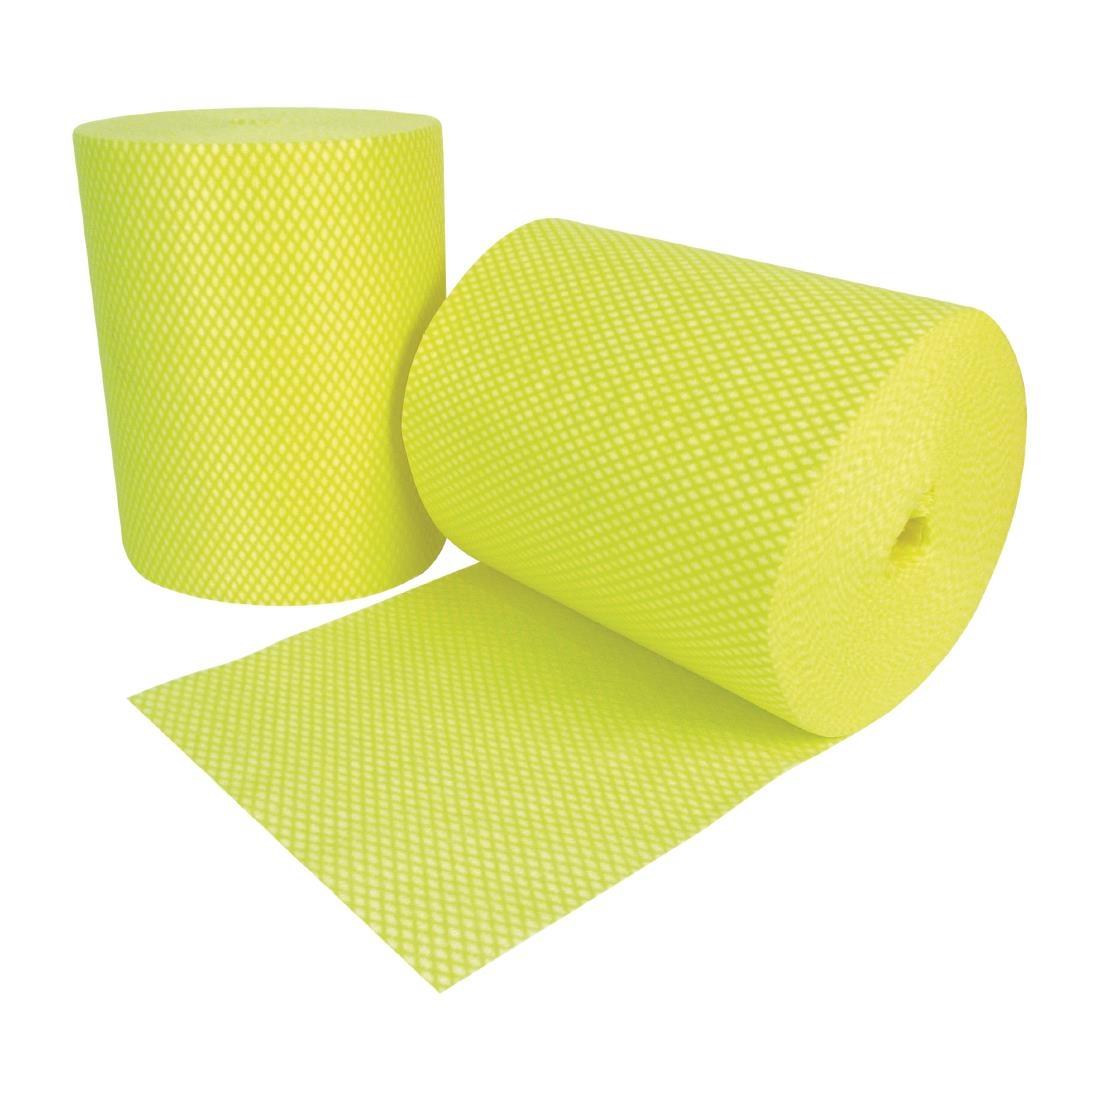 EcoTech Envirolite Super Antibacterial Cleaning Cloths Yellow (Roll of 2 x 500) - FA206  - 1